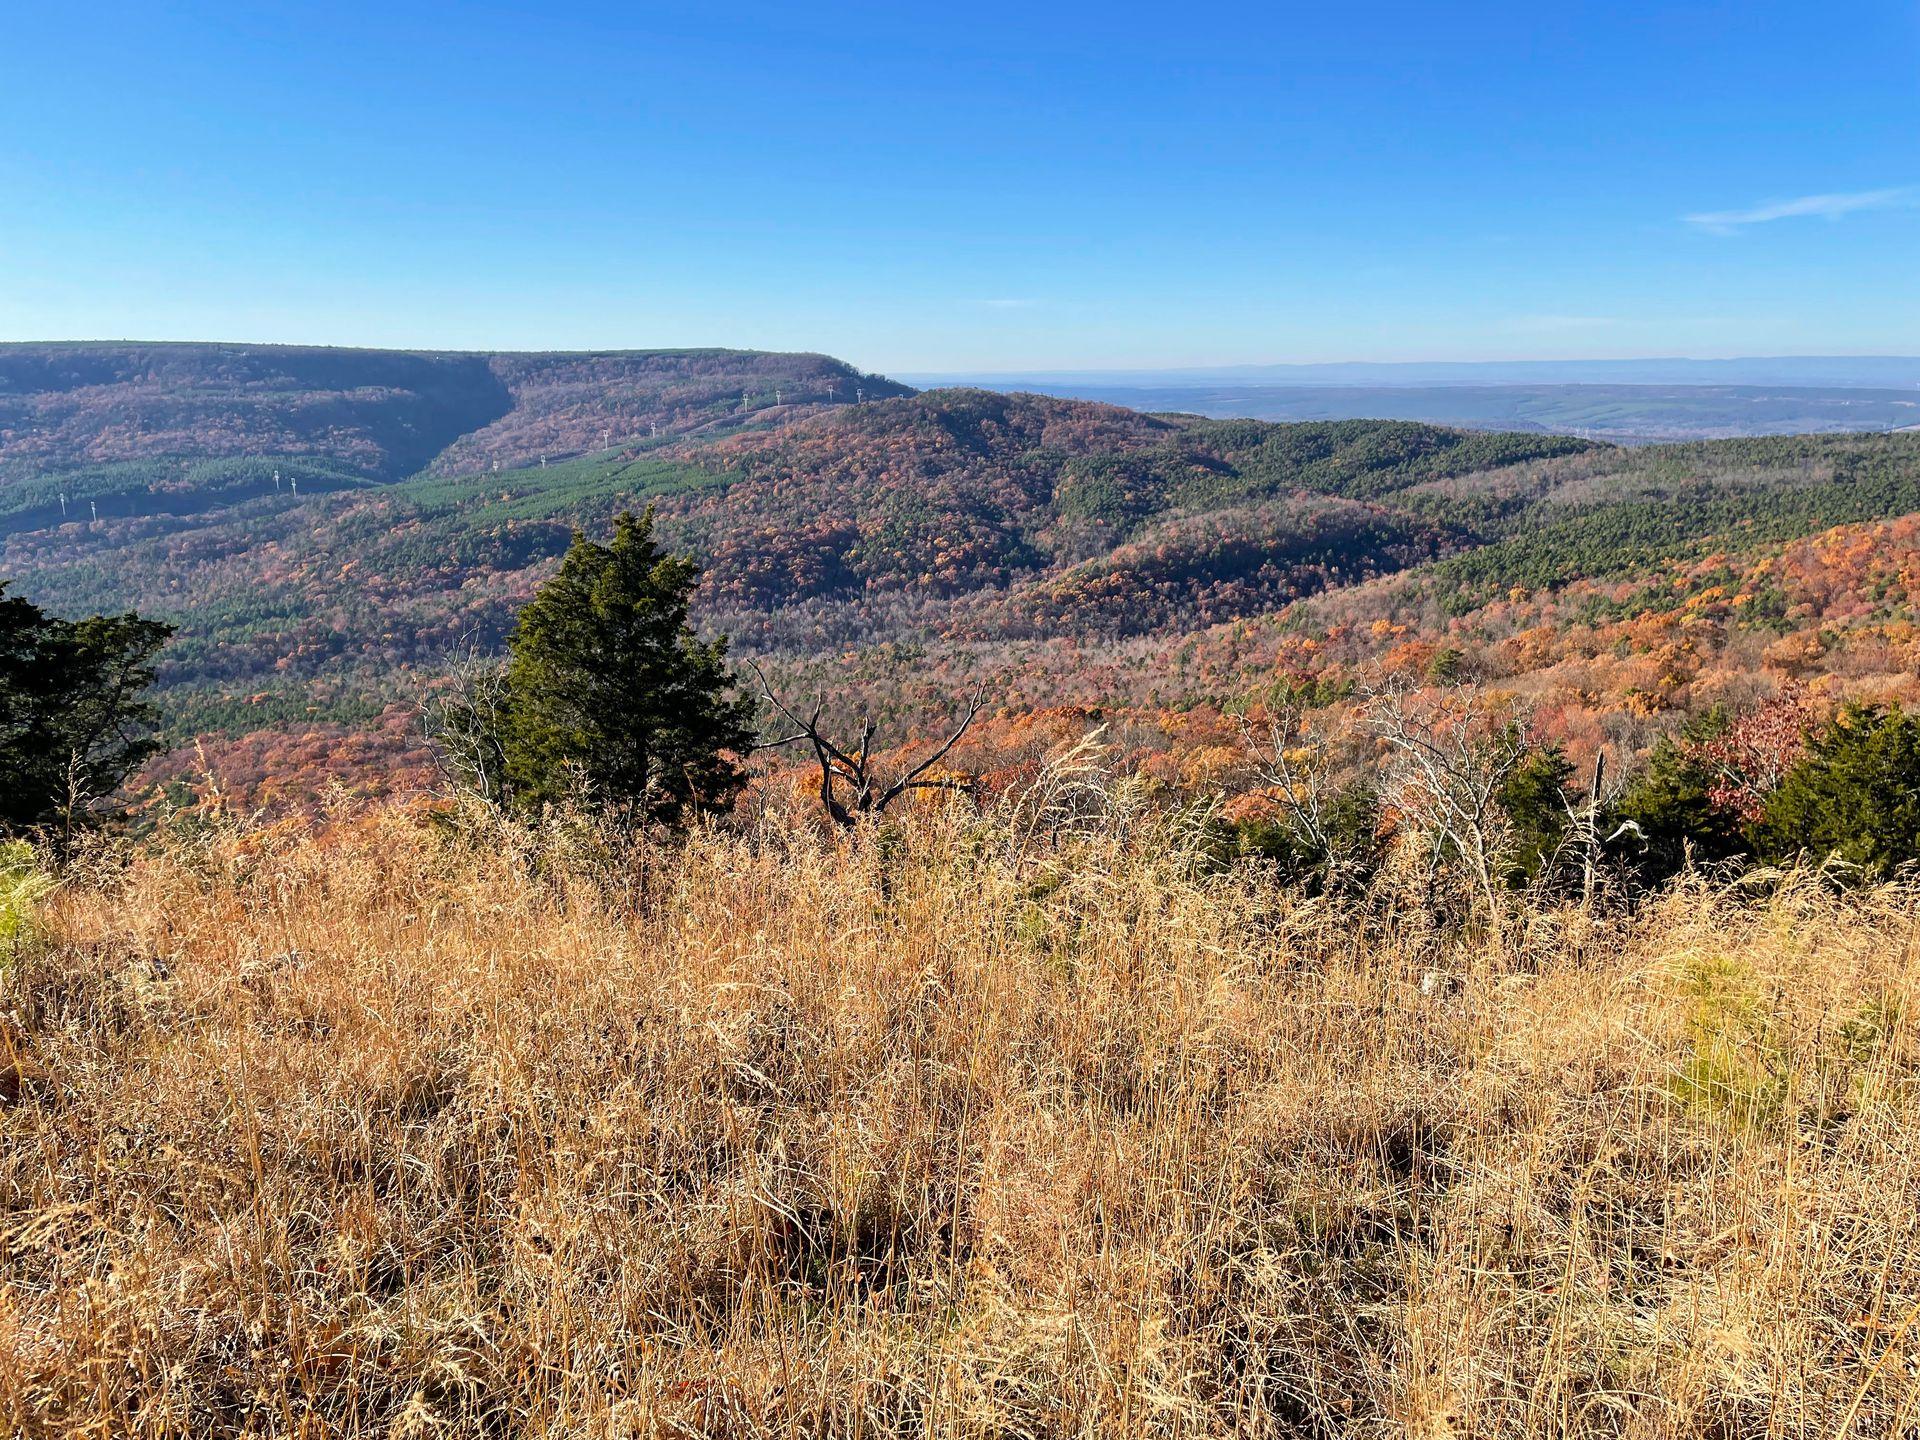 Looking out at a hilly landscape from near the Gum Springs Trail in Mount Nebo.